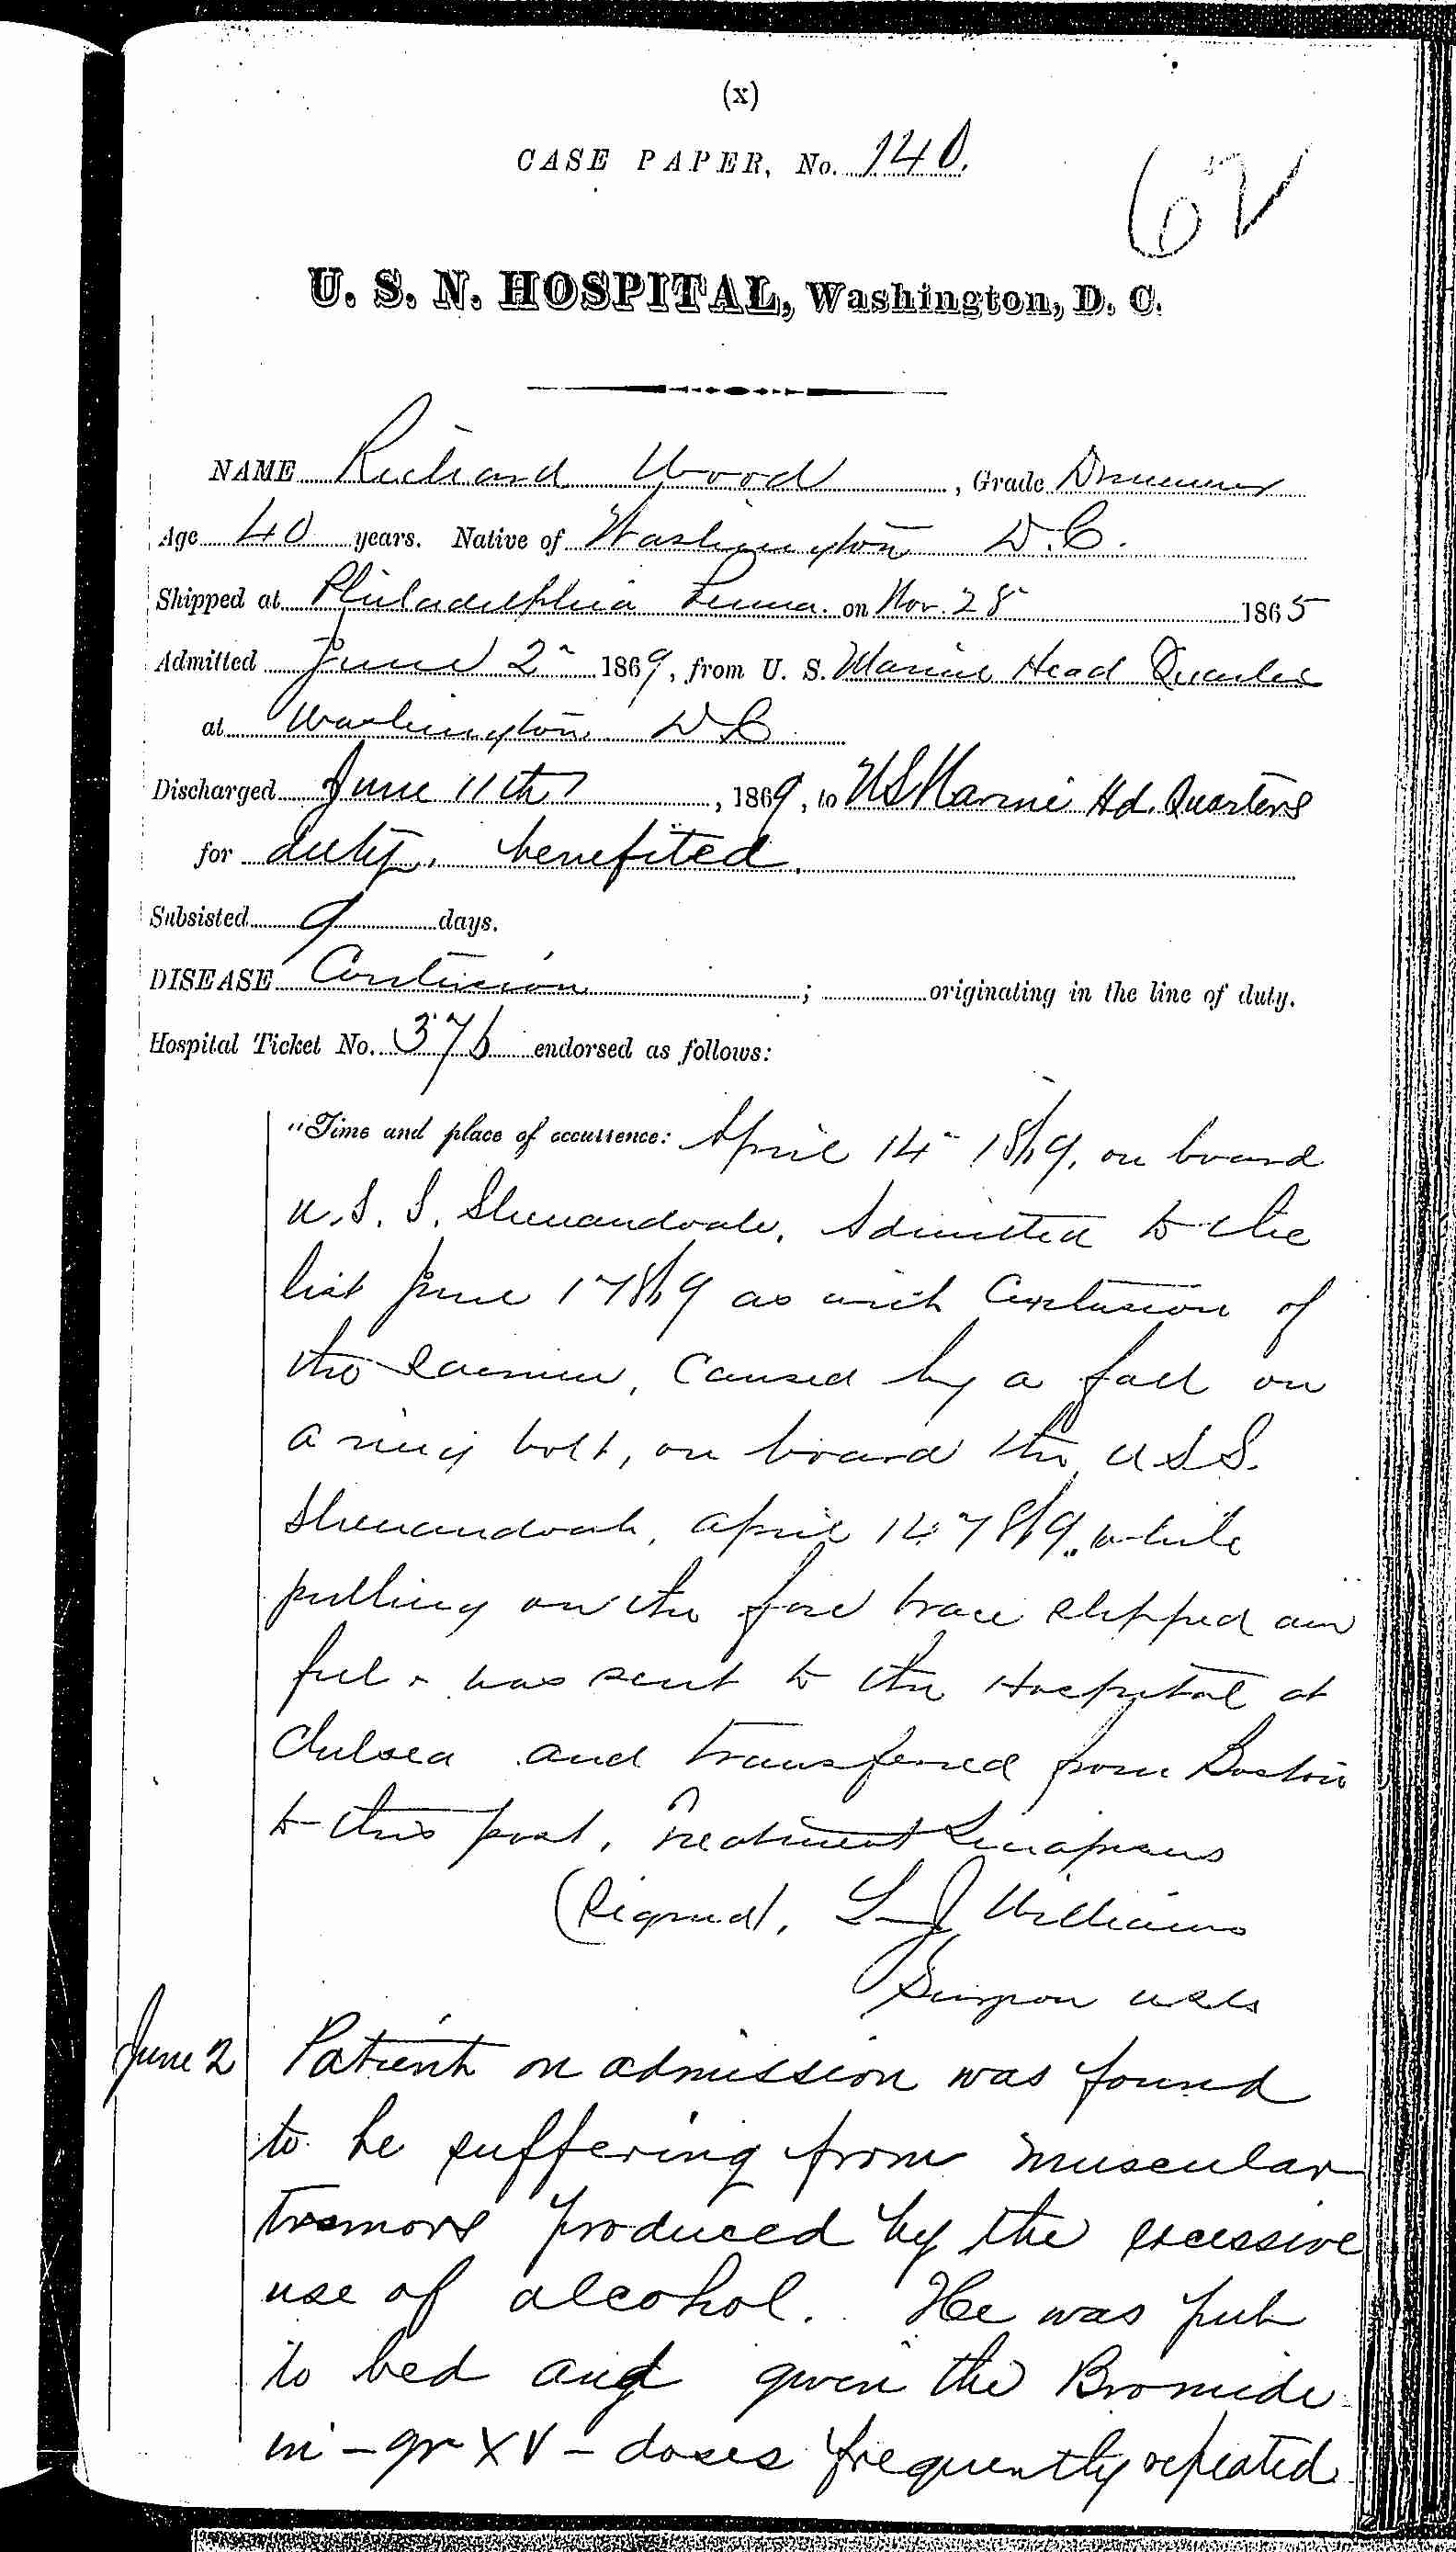 Entry for Richard Wood (page 1 of 2) in the log Hospital Tickets and Case Papers - Naval Hospital - Washington, D.C. - 1868-69